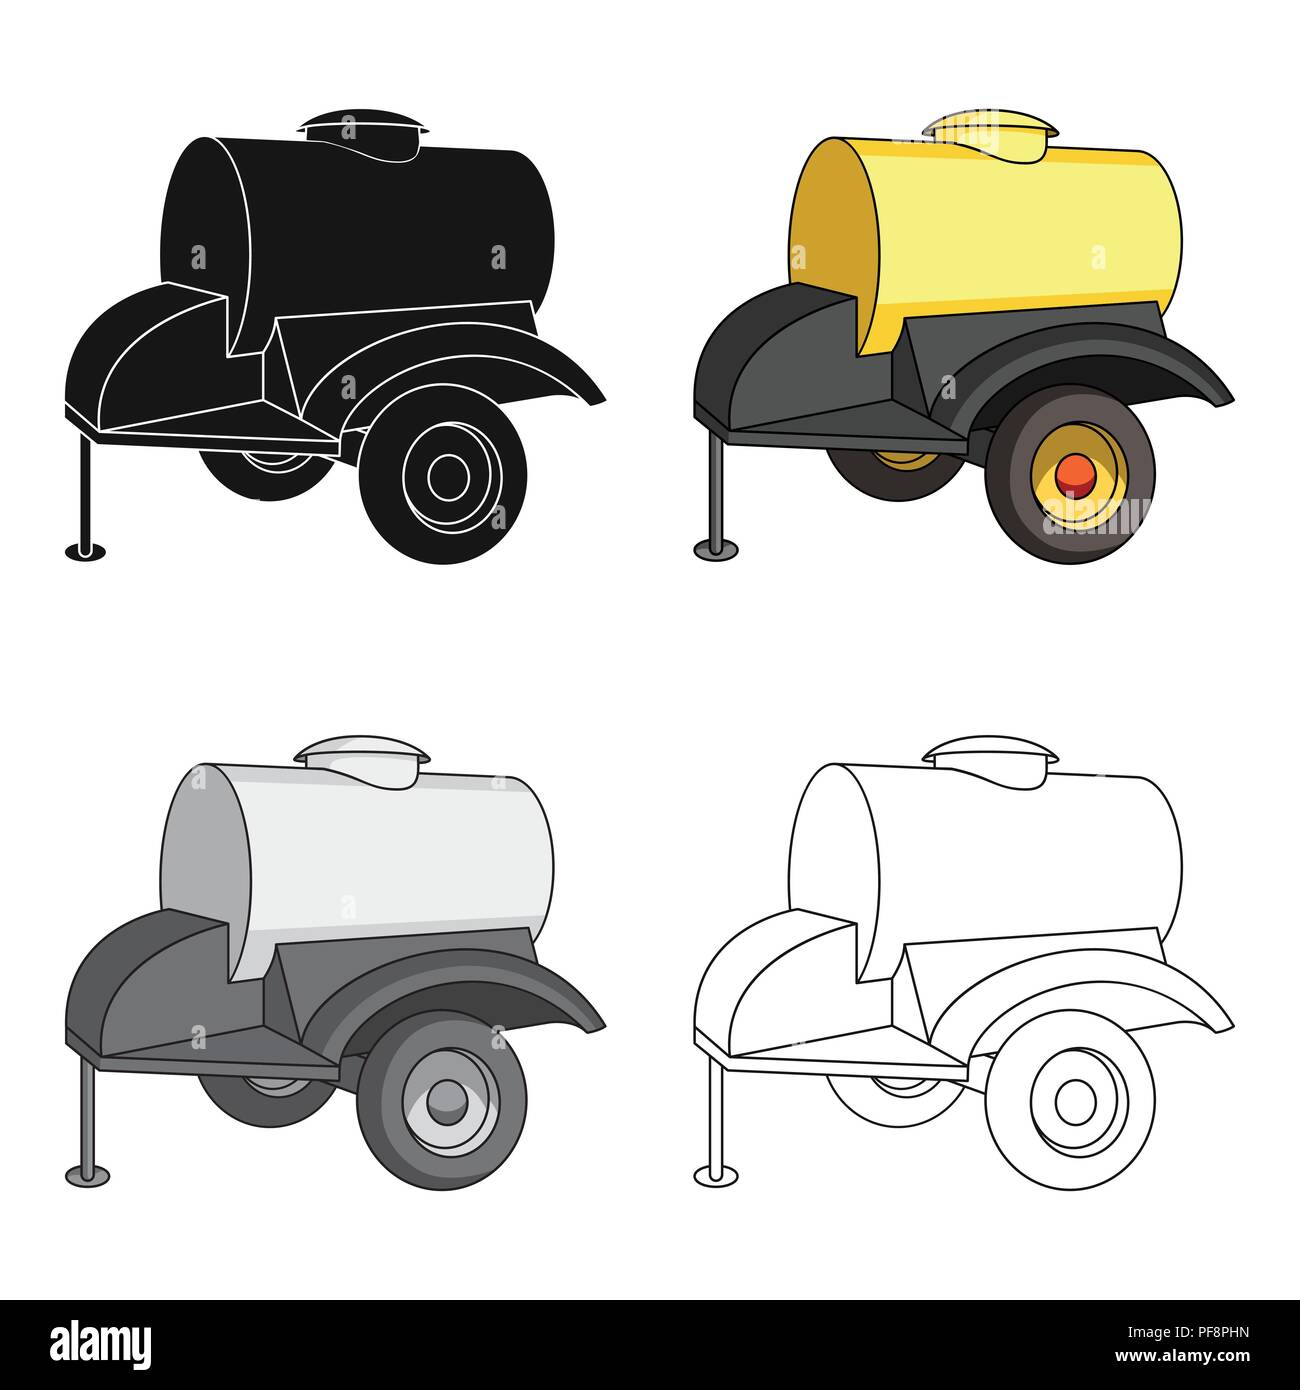 agricultura,automobile,barrel,black,business,car,cargo,cartoon,cistern,container,delivery,design,freight,fuel,gas,heavy,icon,illustration,industrial,isolated,l machinery,liquid,logo,long,lorry,object,oil,plants,sign,symbol,tank,tanker,traffic,trailer,transport,transportation,truck,vector,vehicle,watering,web,wheel,wheels,yellow Vector Vectors , Stock Vector